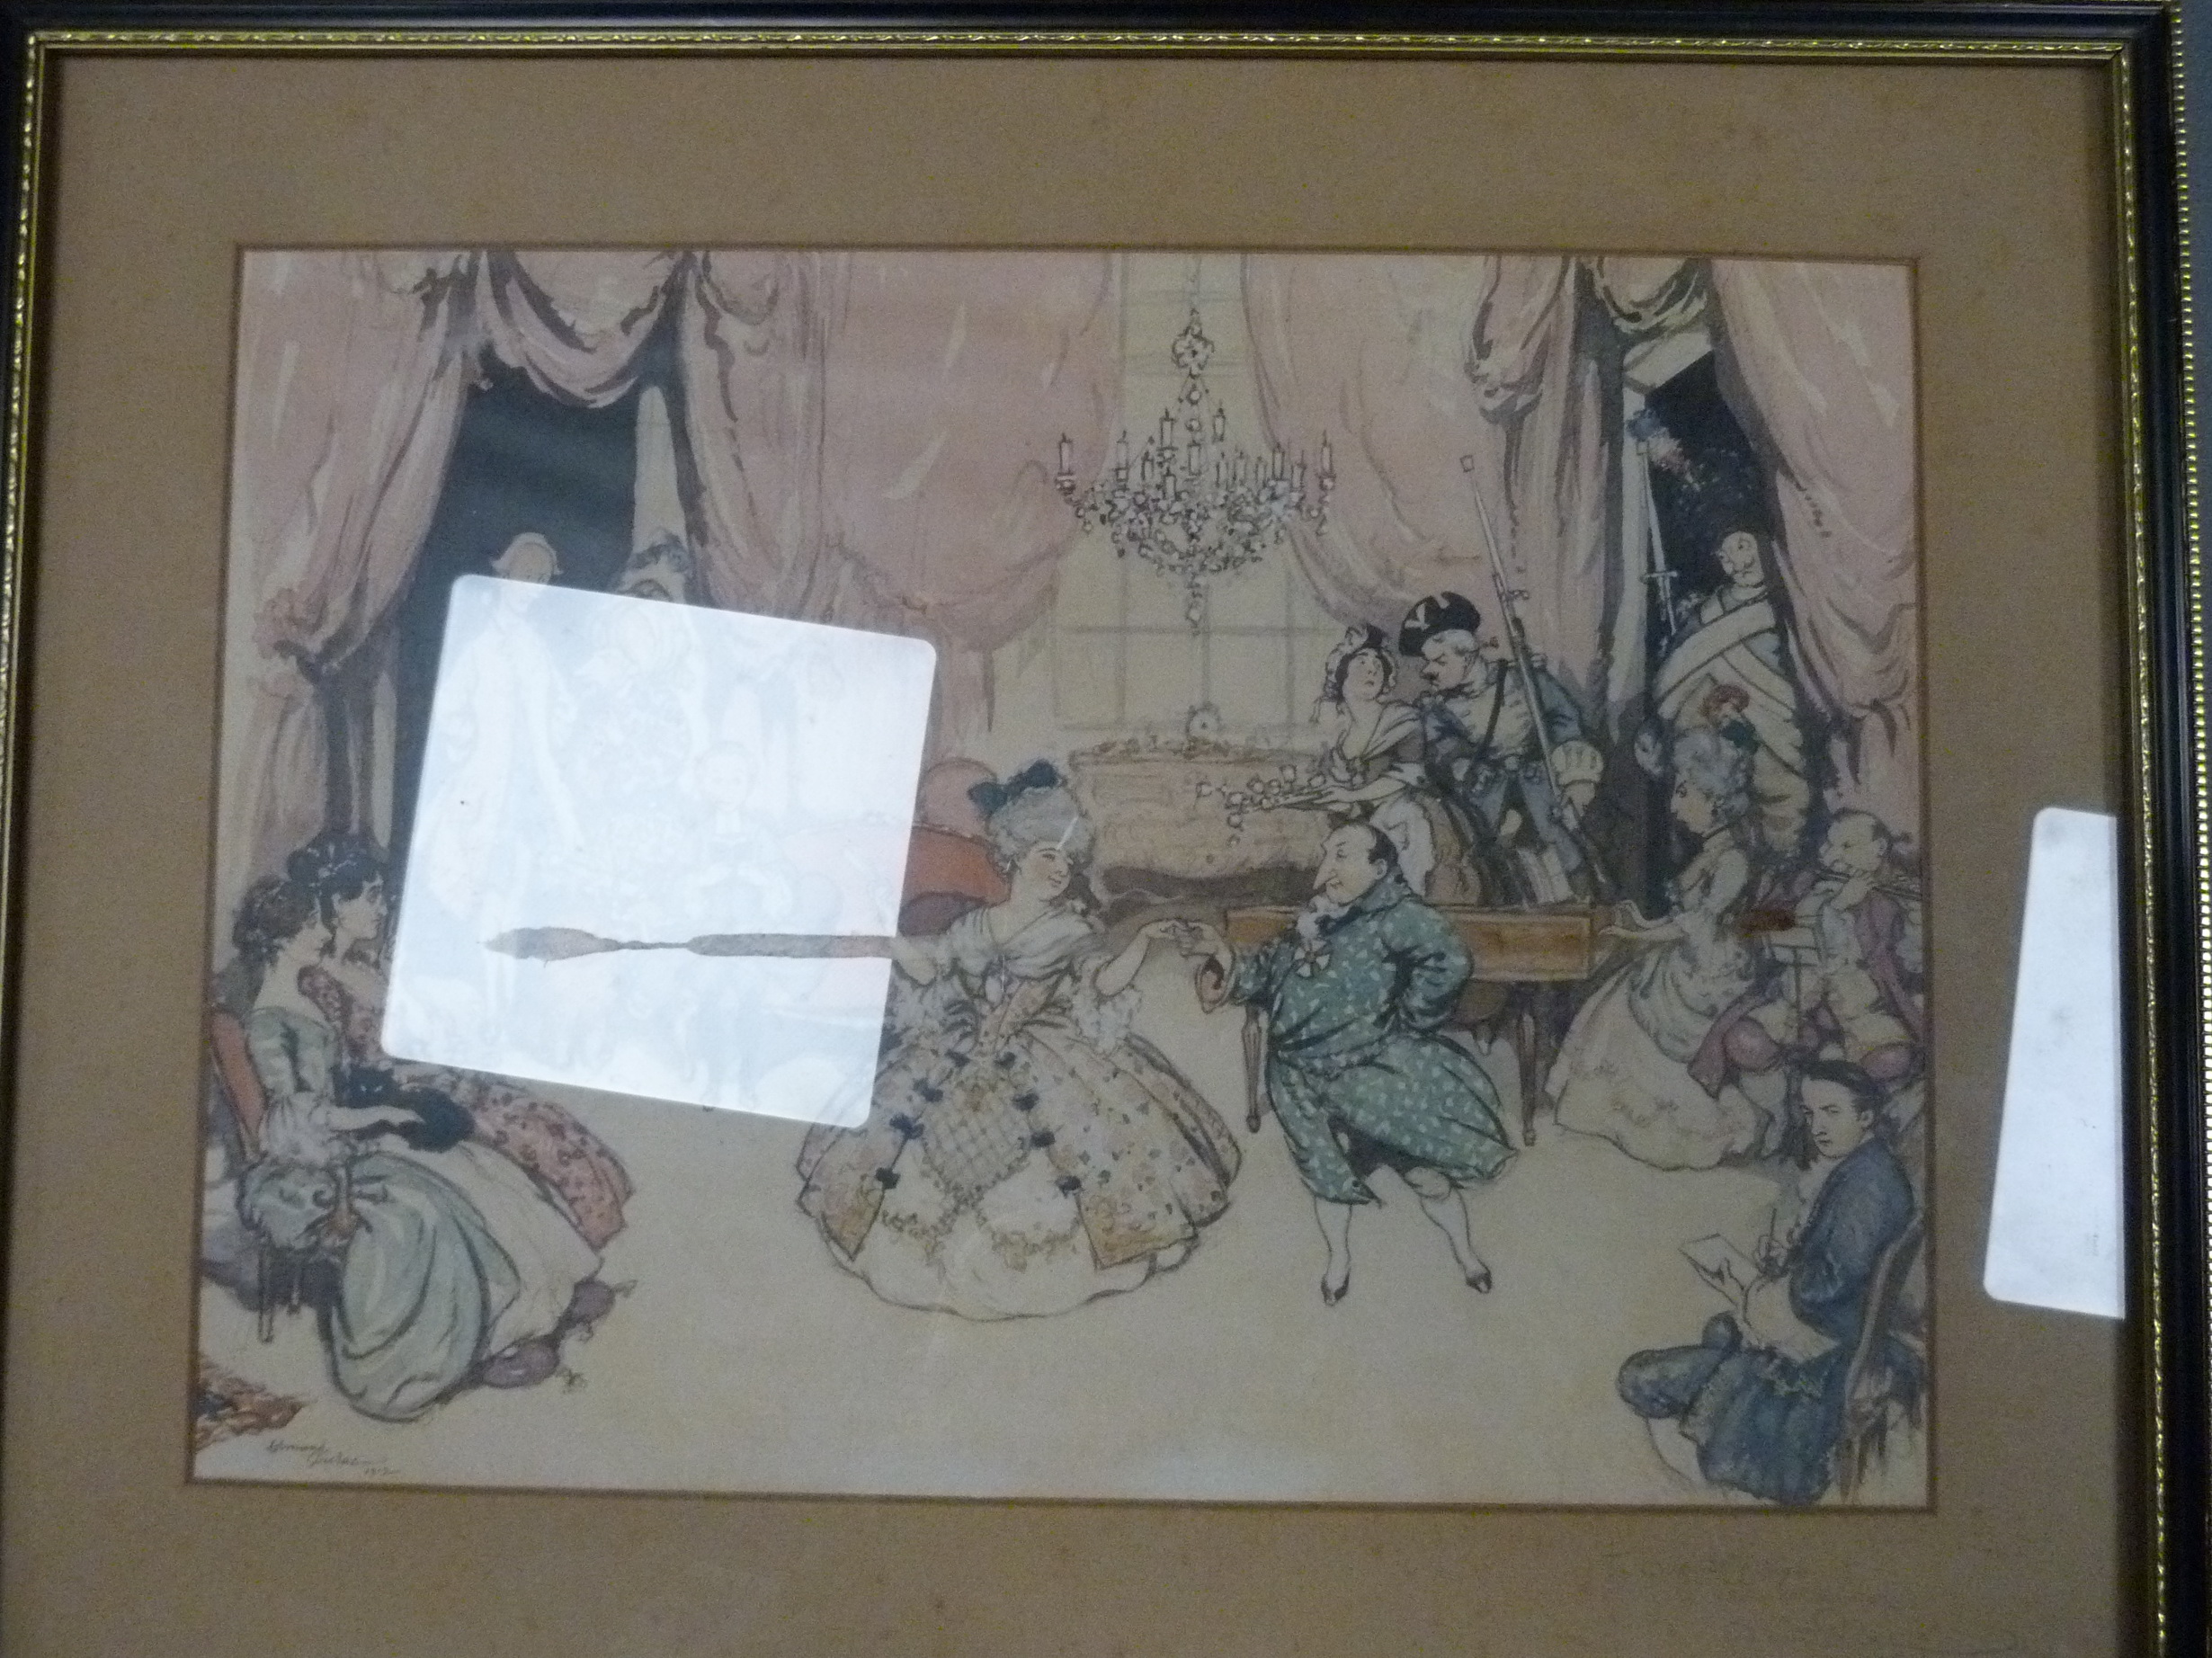 DULAC EDMUND.  Colour print in Hogarth frame, signed & inscribed to the mount by Dulac.